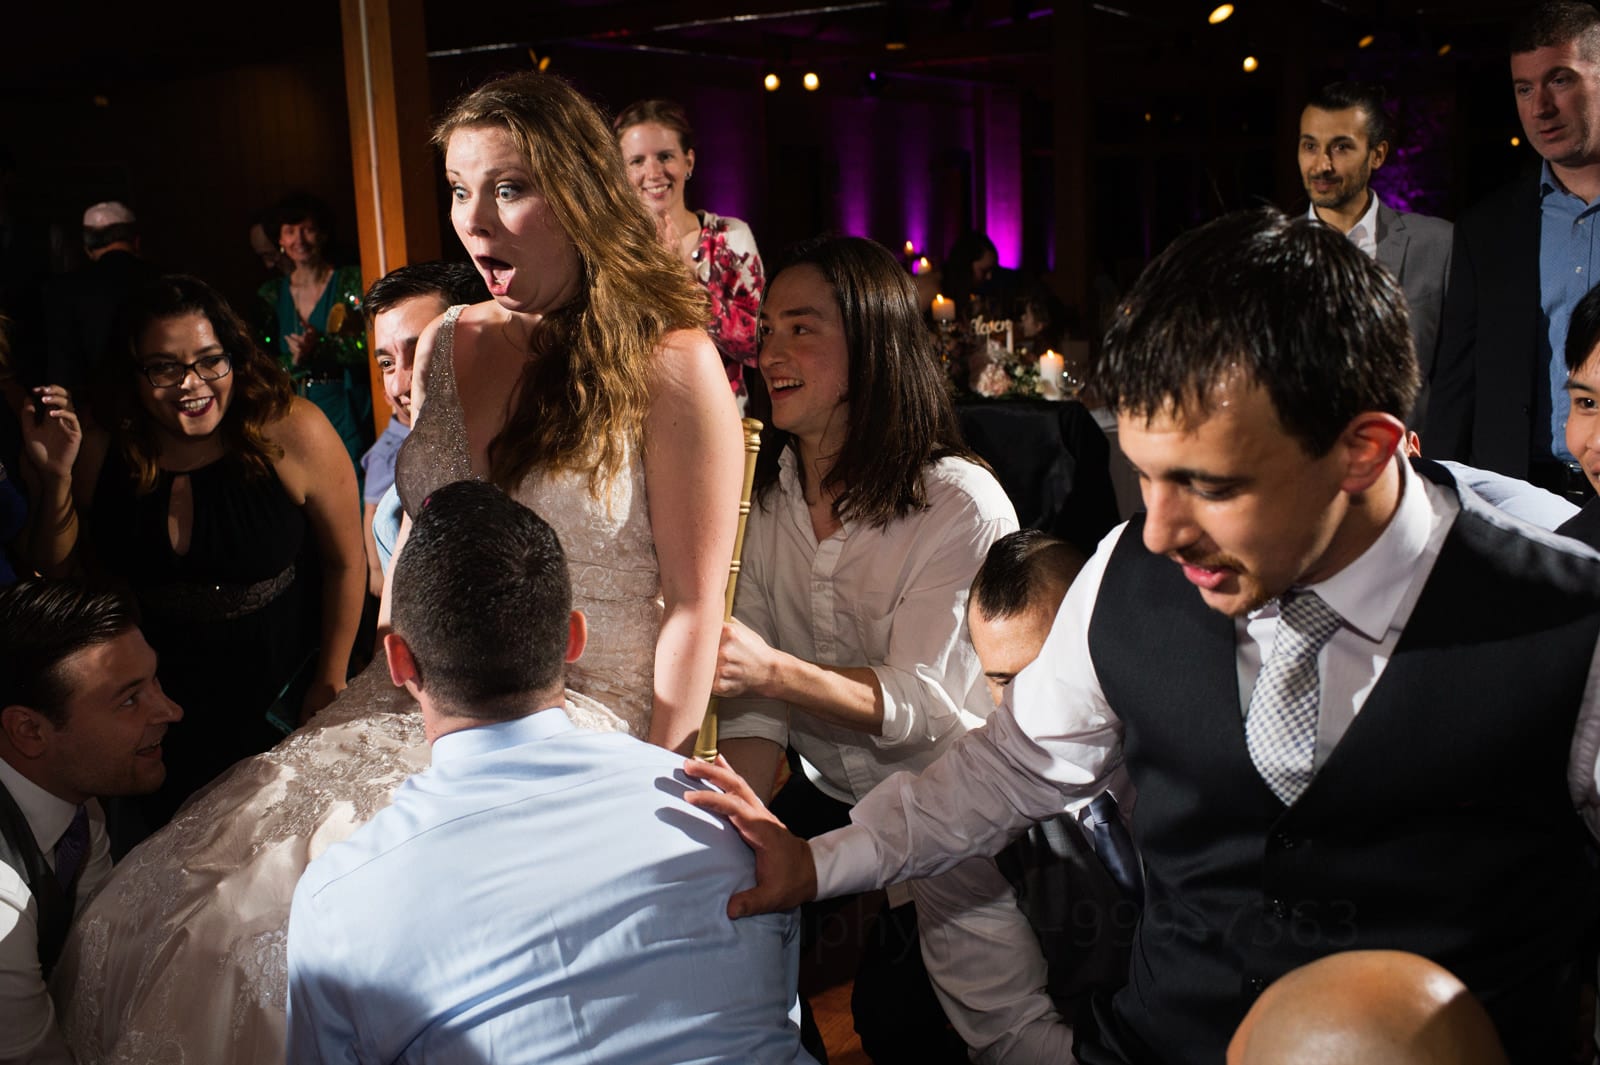 A bride makes a shocked expression as she and her groom are lifted up on chairs during their fall wedding at Seven Springs.